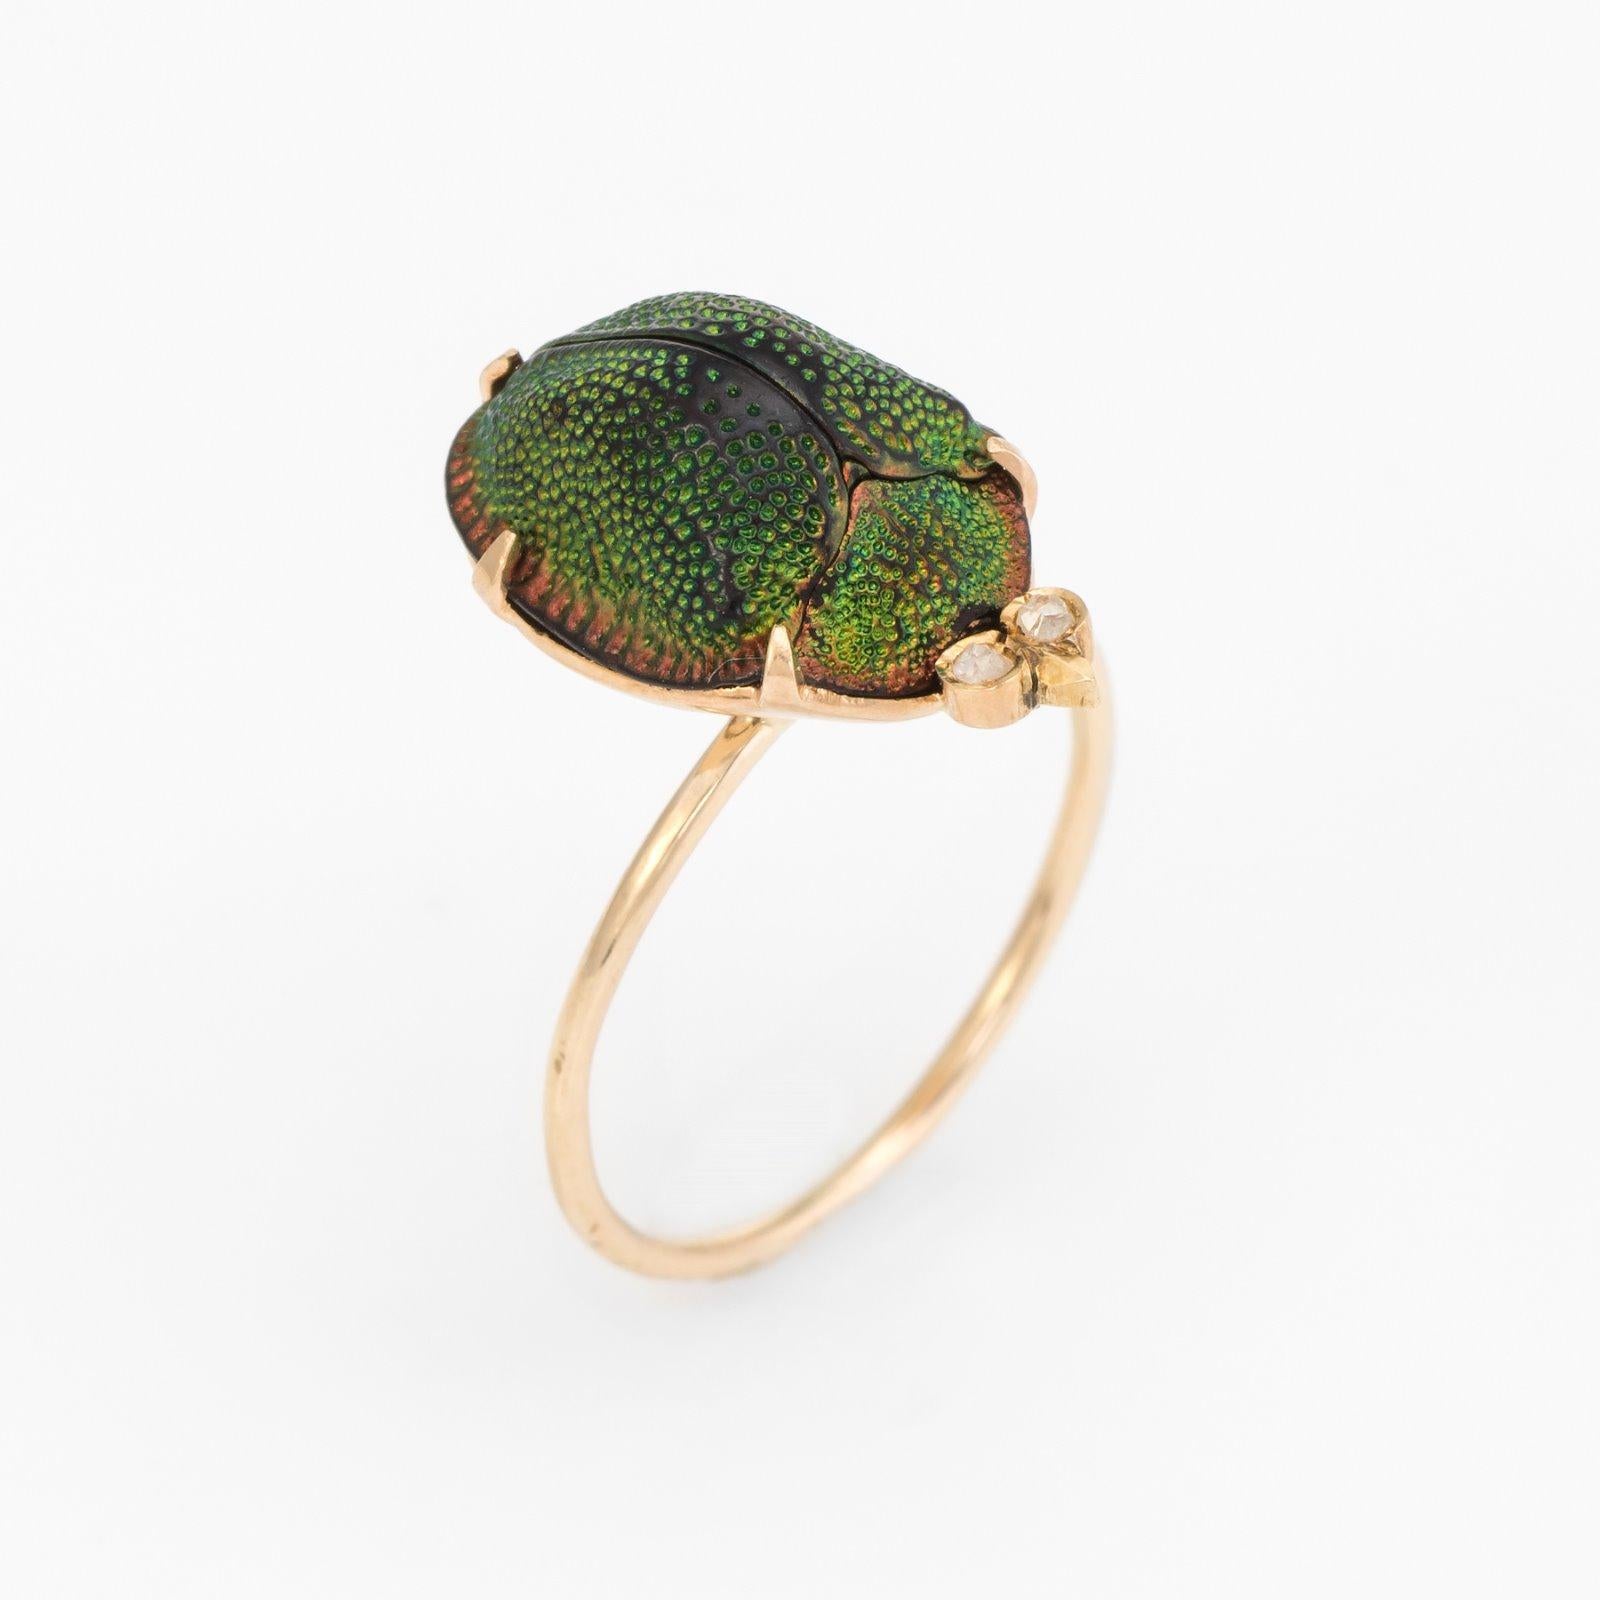 Originally an antique Victorian era stick pin (circa 1880s to 1900s), the scarab beetle ring  is crafted in 10 karat yellow gold.

The ring is mounted with the original stick pin. Our jeweler rounded the stick pin into a slim band for the finger.